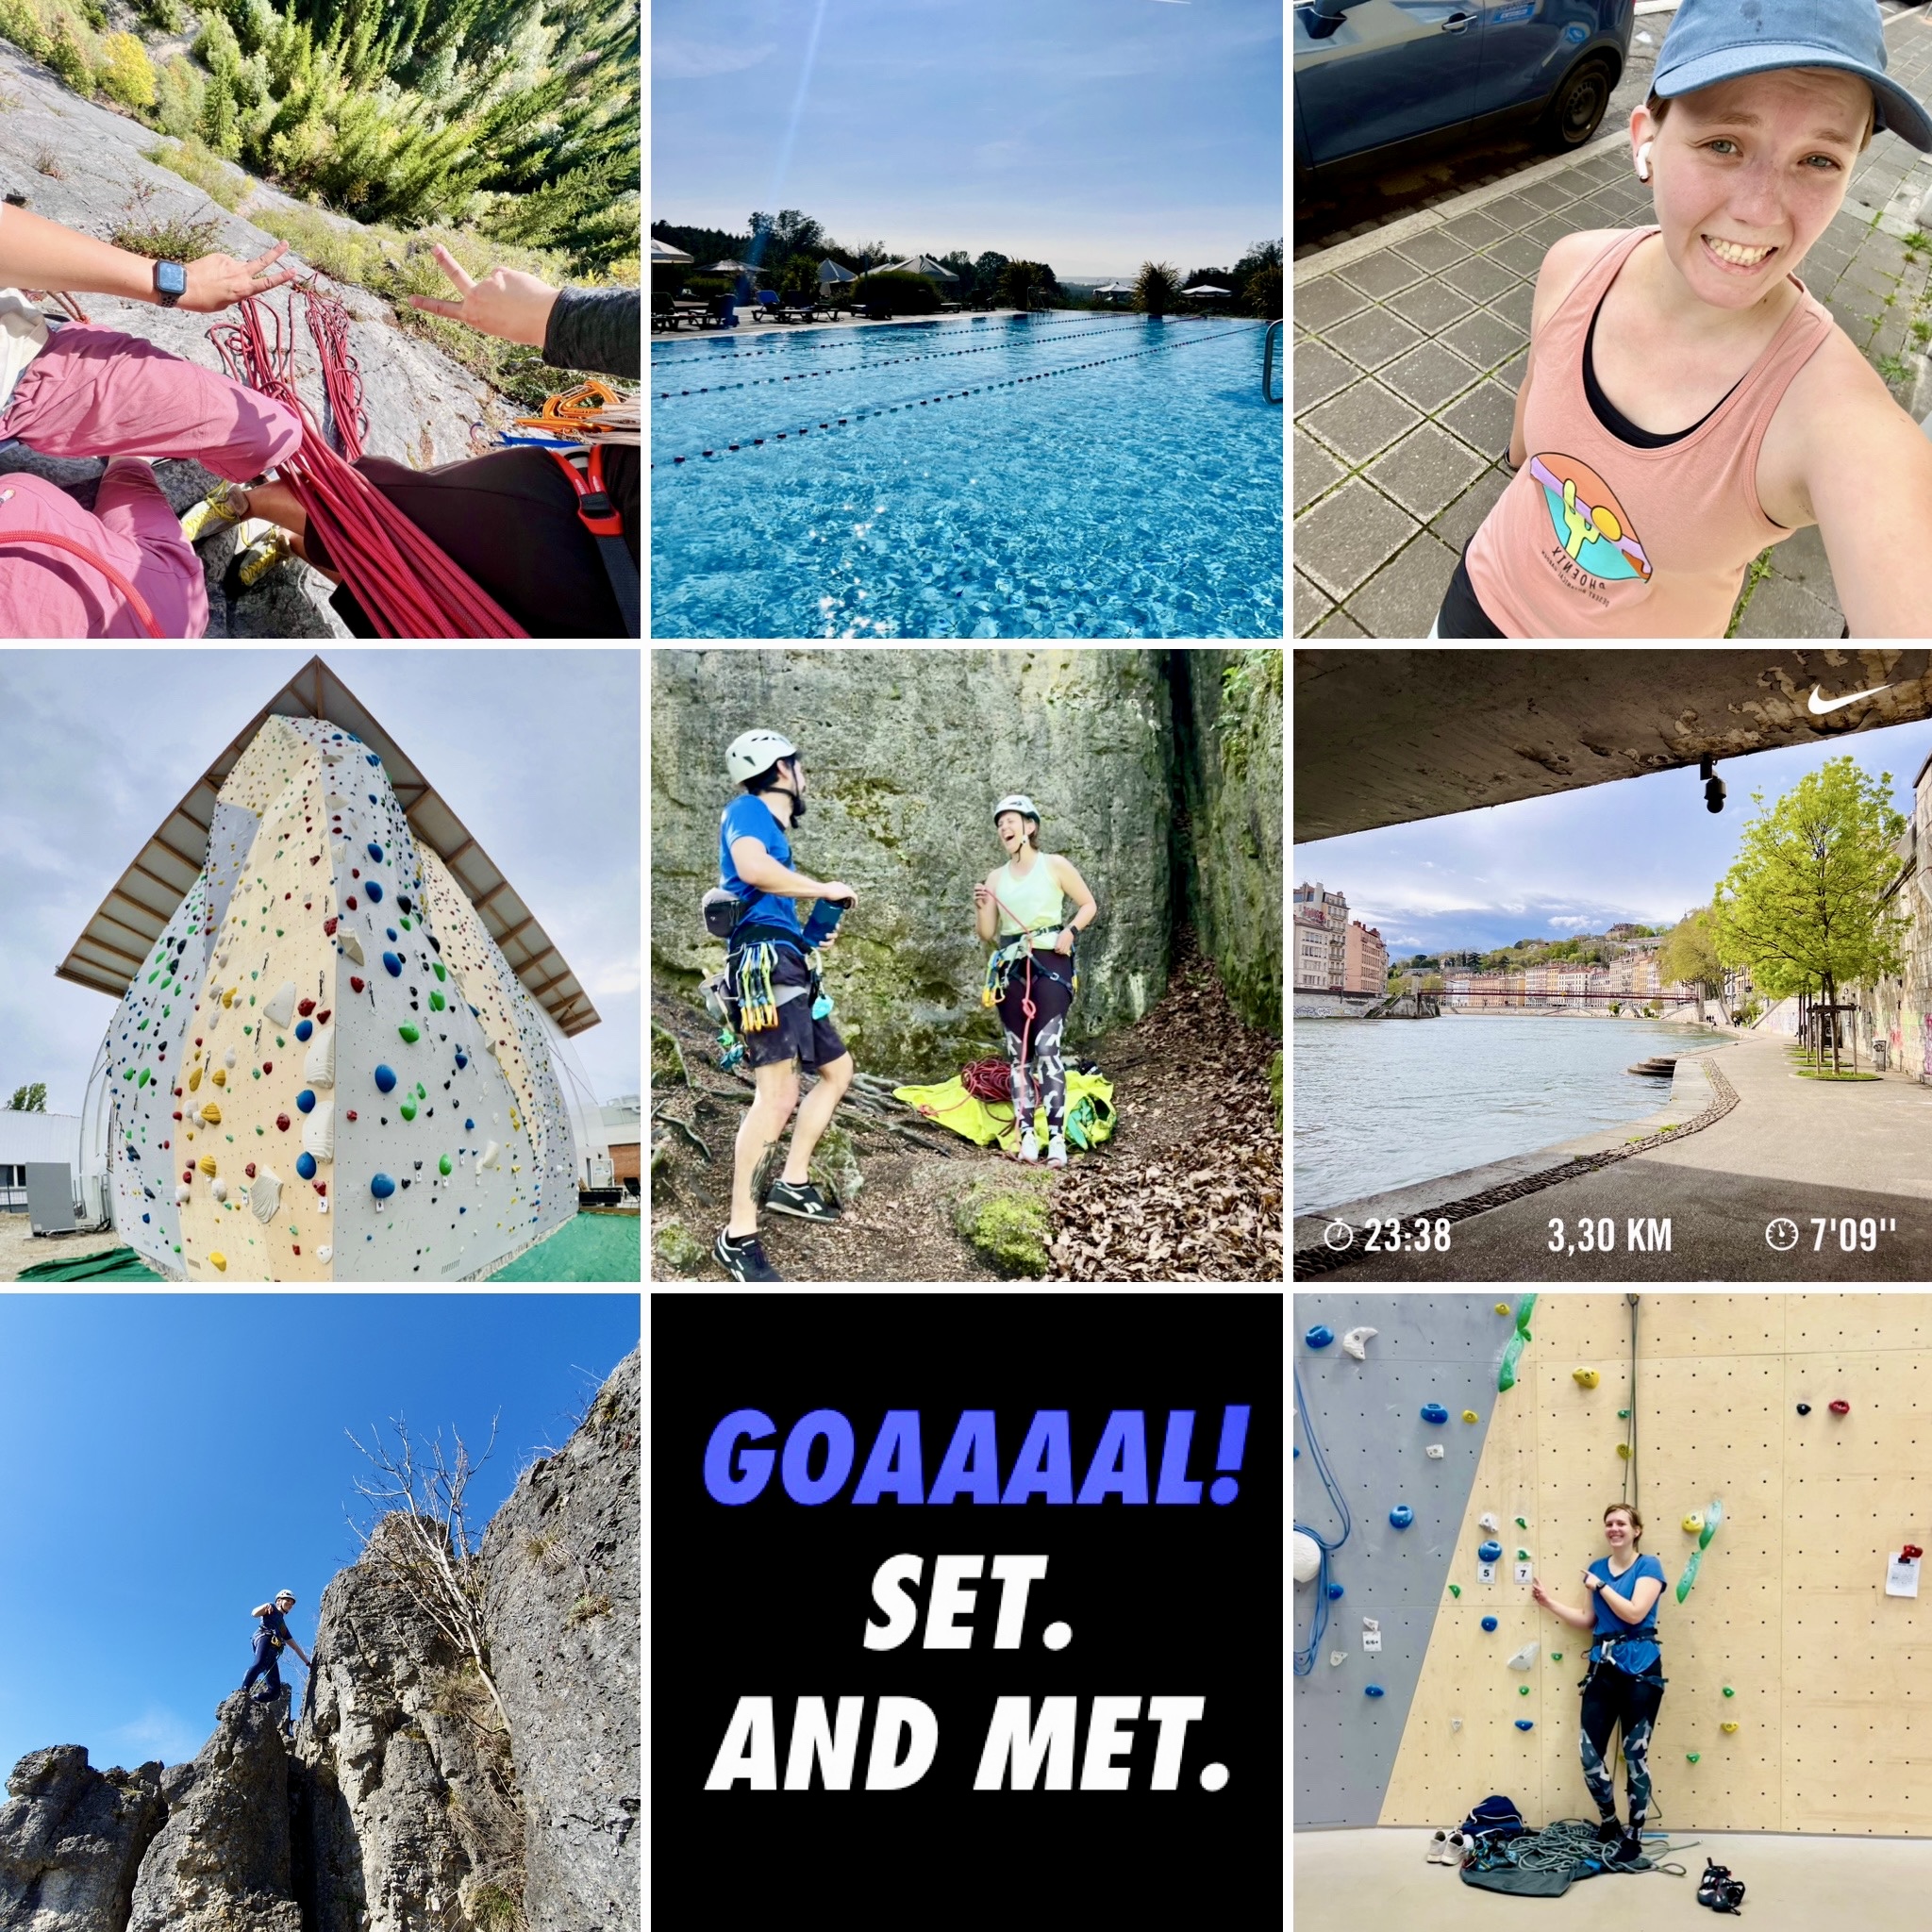 Collage of nine pics. 1: View from above with Feli and her both making peace signs with their hands at the top of a mountain above of green trees. 2: Empty swimming pool with swimming lanes while sun shining. 3: Selfie with Feli in running gear with airpods in her ears. 4: The edge of an outside climbing wall in wide angle perspective. 5: Feli and her belayer laughing at the bottom of a rock climbing route, both wearing climbing gear and helmets. 6: Screenshot of a running workout with 23 minutes and 3,3 km, the background is showing Lyon and a river. 7: Feli standing on top of a mountain silhouette. 8: Screenshot of Nike Run Club end screen which reads Goaaaaal! Set. And met. 9: Feli pointing at the sign of a route with UIAA 7 scale in her climbing gym, smiling from success